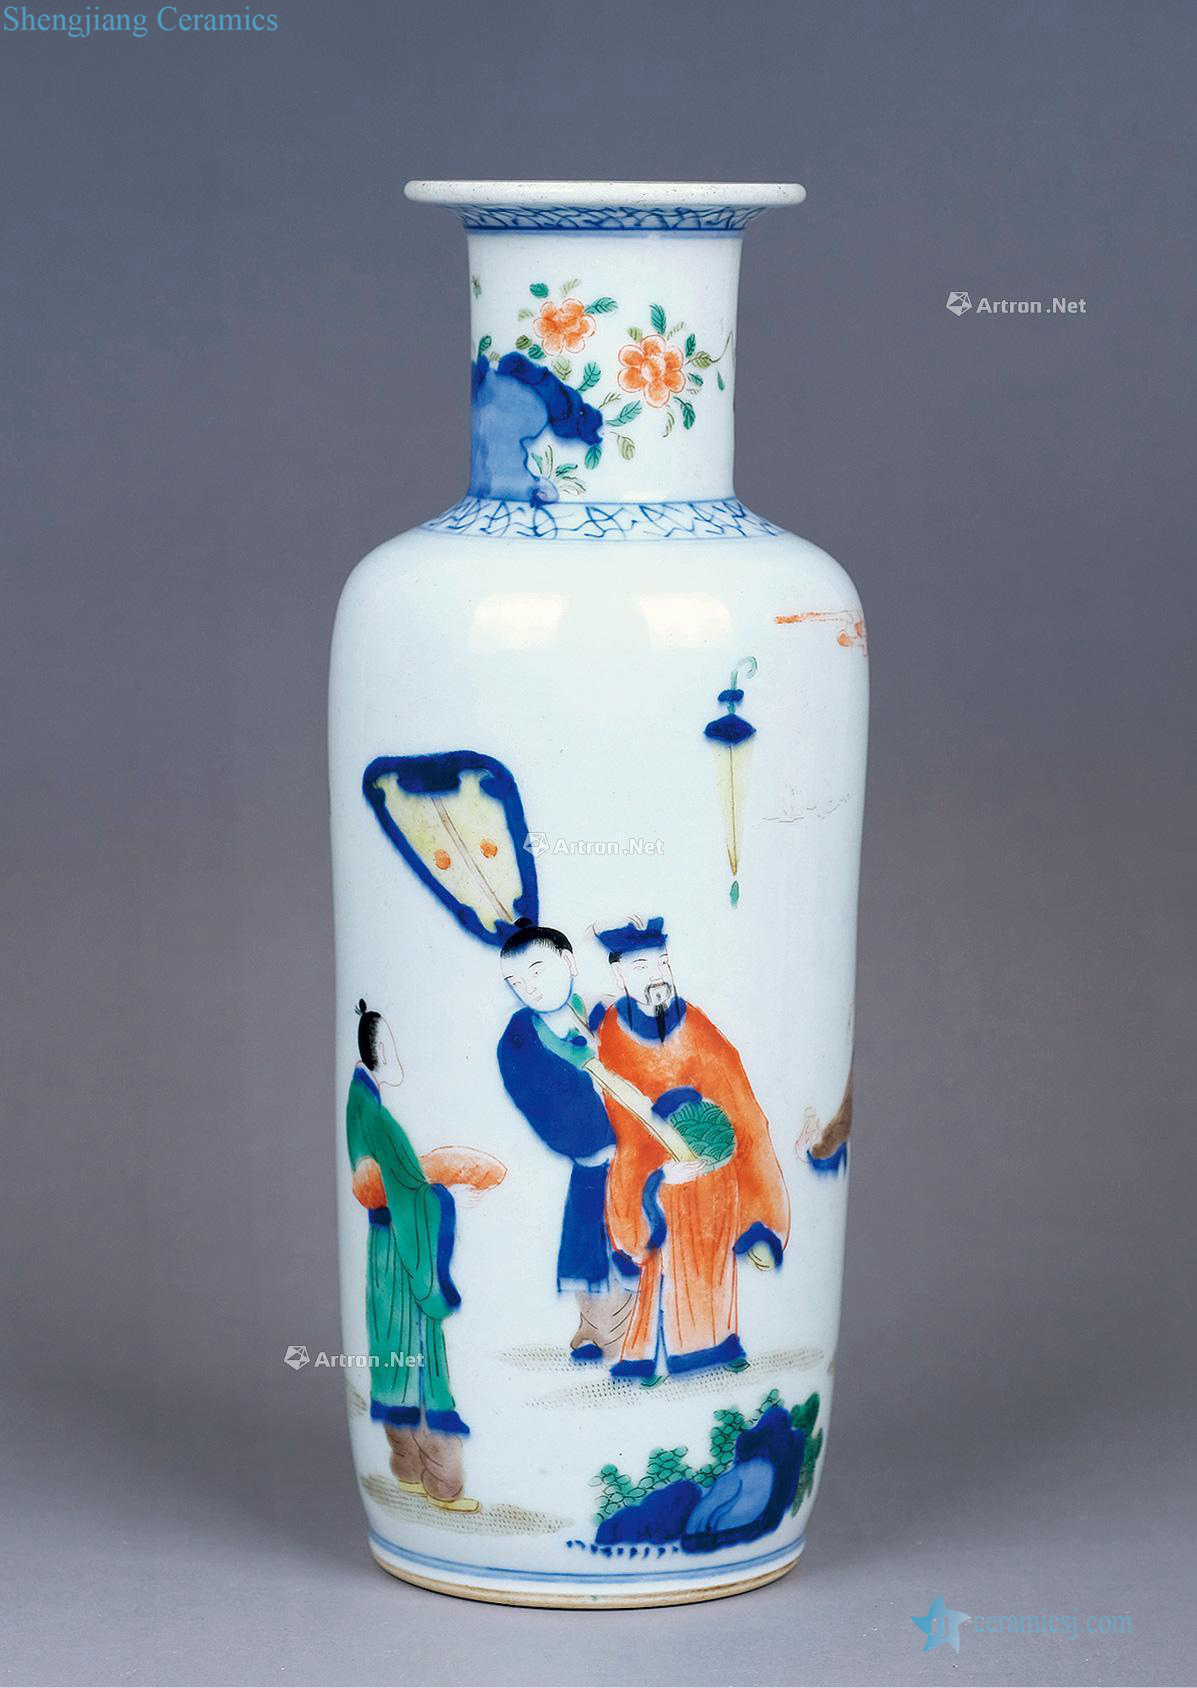 Kangxi lines were bottles colorful characters